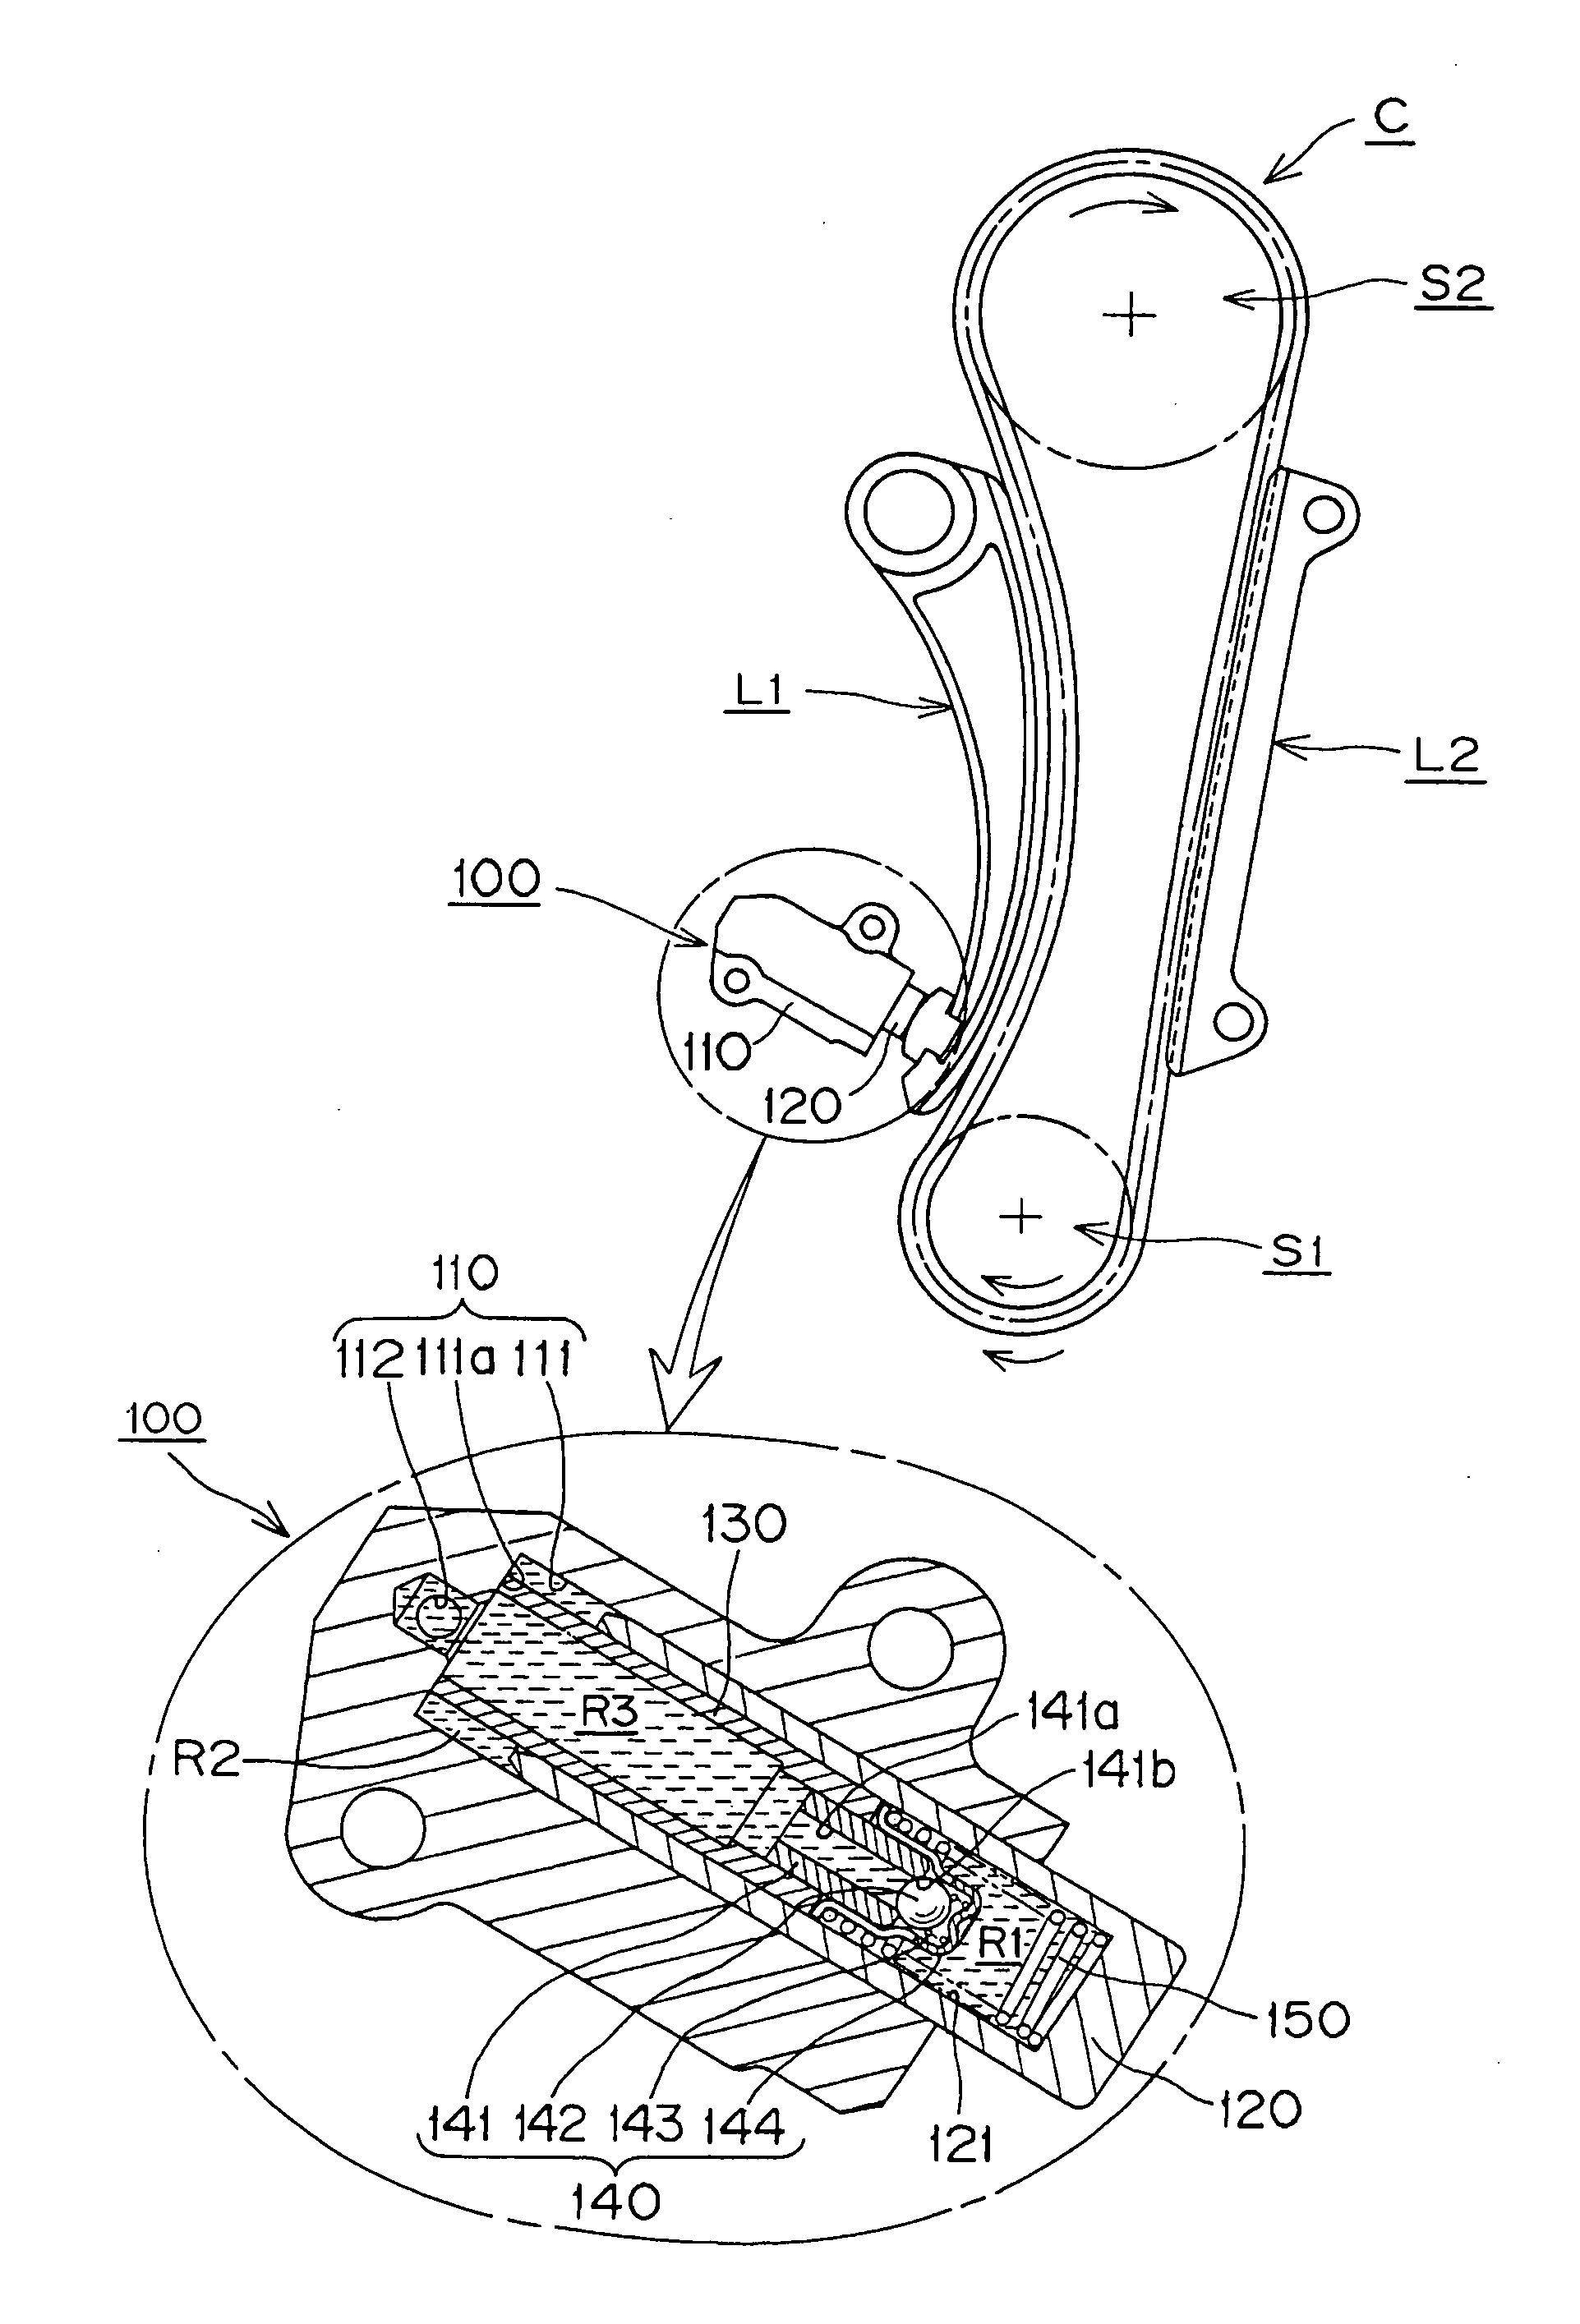 Downward angle settable hydraulic tensioner